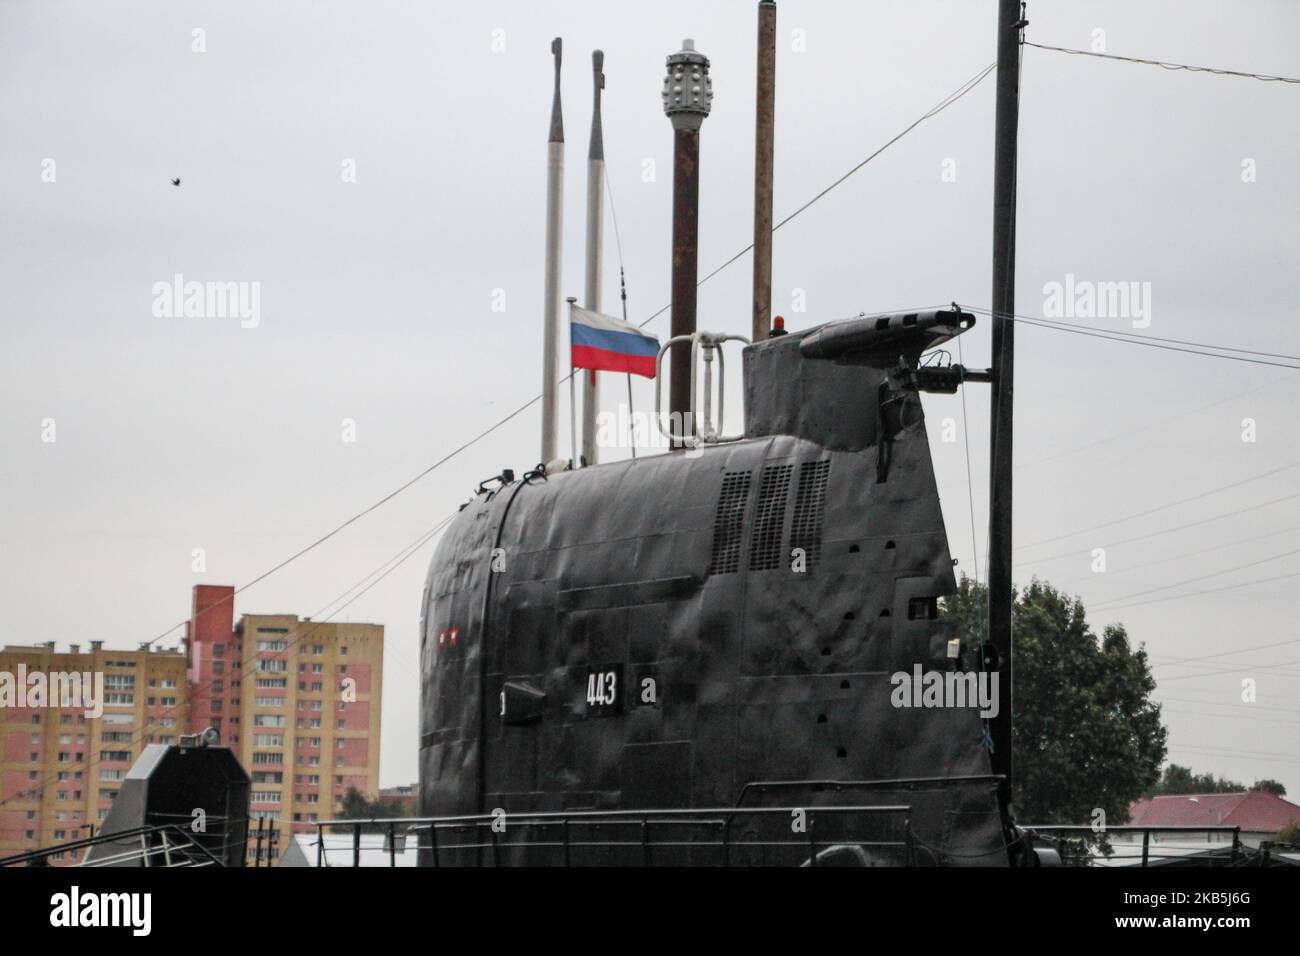 Russian Federation flag on the wind on the Submarine B-413 (NATO Foxtrot) is seen in Museum of the World Ocean in Kaliningrad, Russia, on 7 September 2019 Launched in 1968 from a slipway in Leningrad patrolled within the 4th submarine squadron of the Red Banner Northern Fleet between 1969 and 1990. It is 90 m long, armed with 22 torpedoes and capable of staying submerged for up to 5 days, played a massive role in the Cold War between the USSR and the US. (Photo by Michal Fludra/NurPhoto) Stock Photo